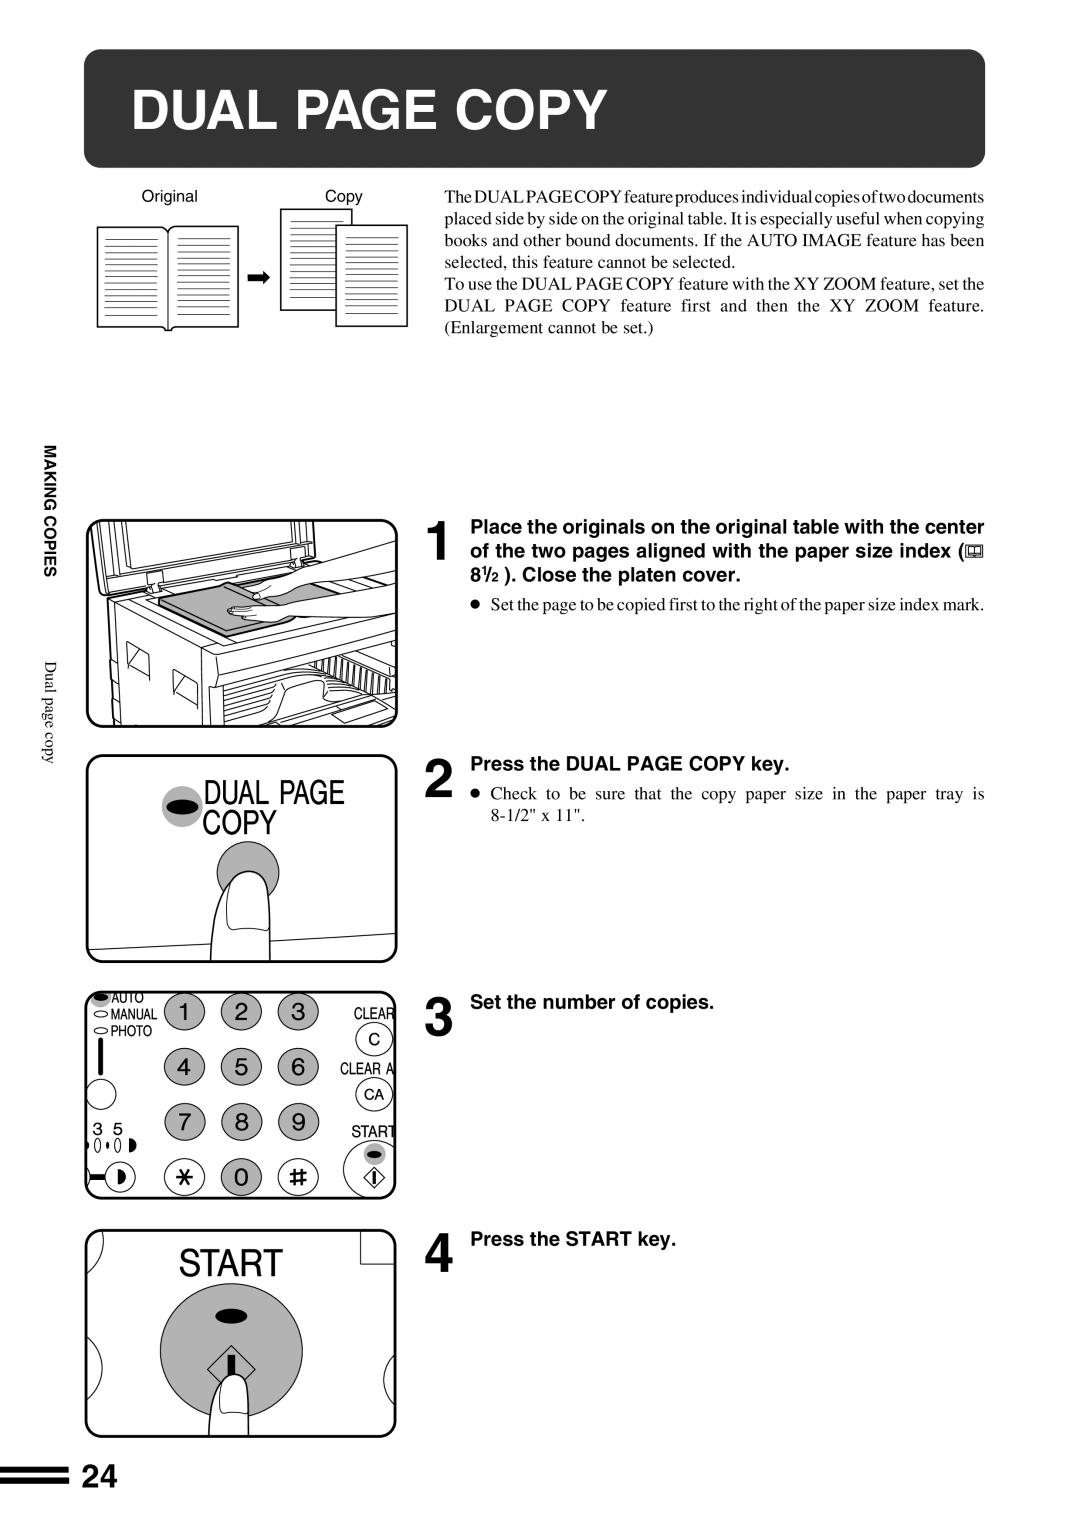 Sharp AR-162S operation manual Dual Page Copy, Press the DUAL PAGE COPY key, Set the number of copies Press the START key 